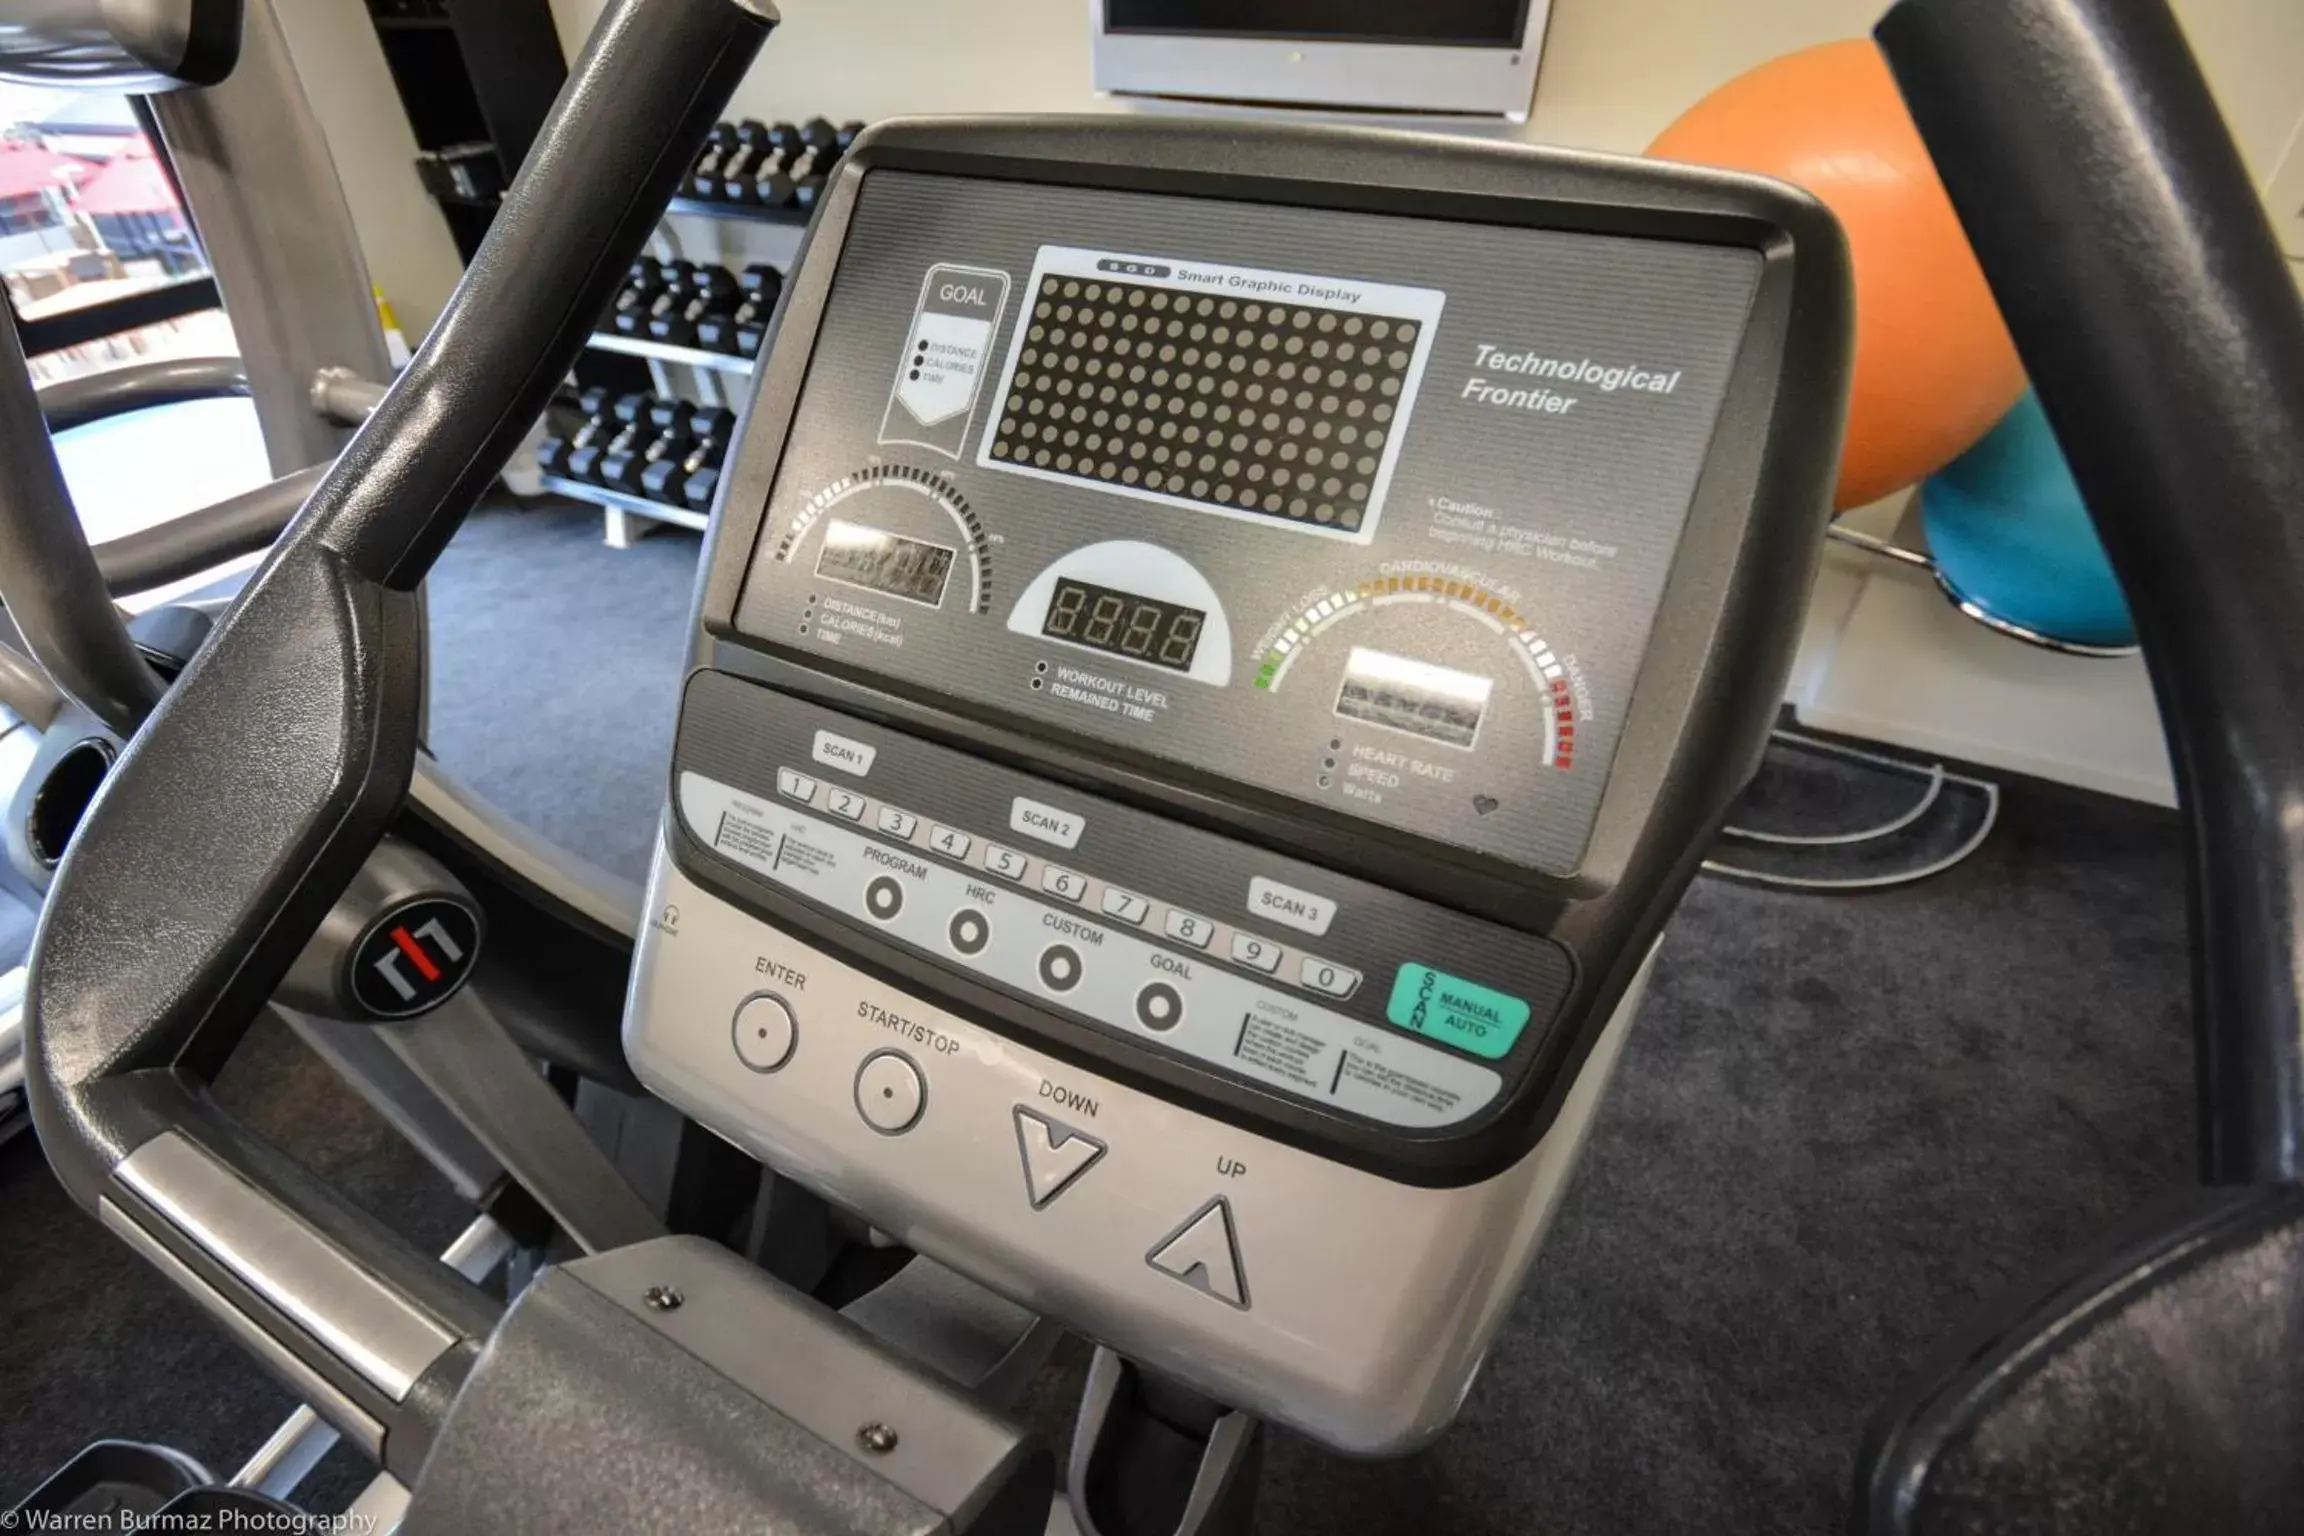 Fitness centre/facilities, Fitness Center/Facilities in Chateau Marlborough Hotel